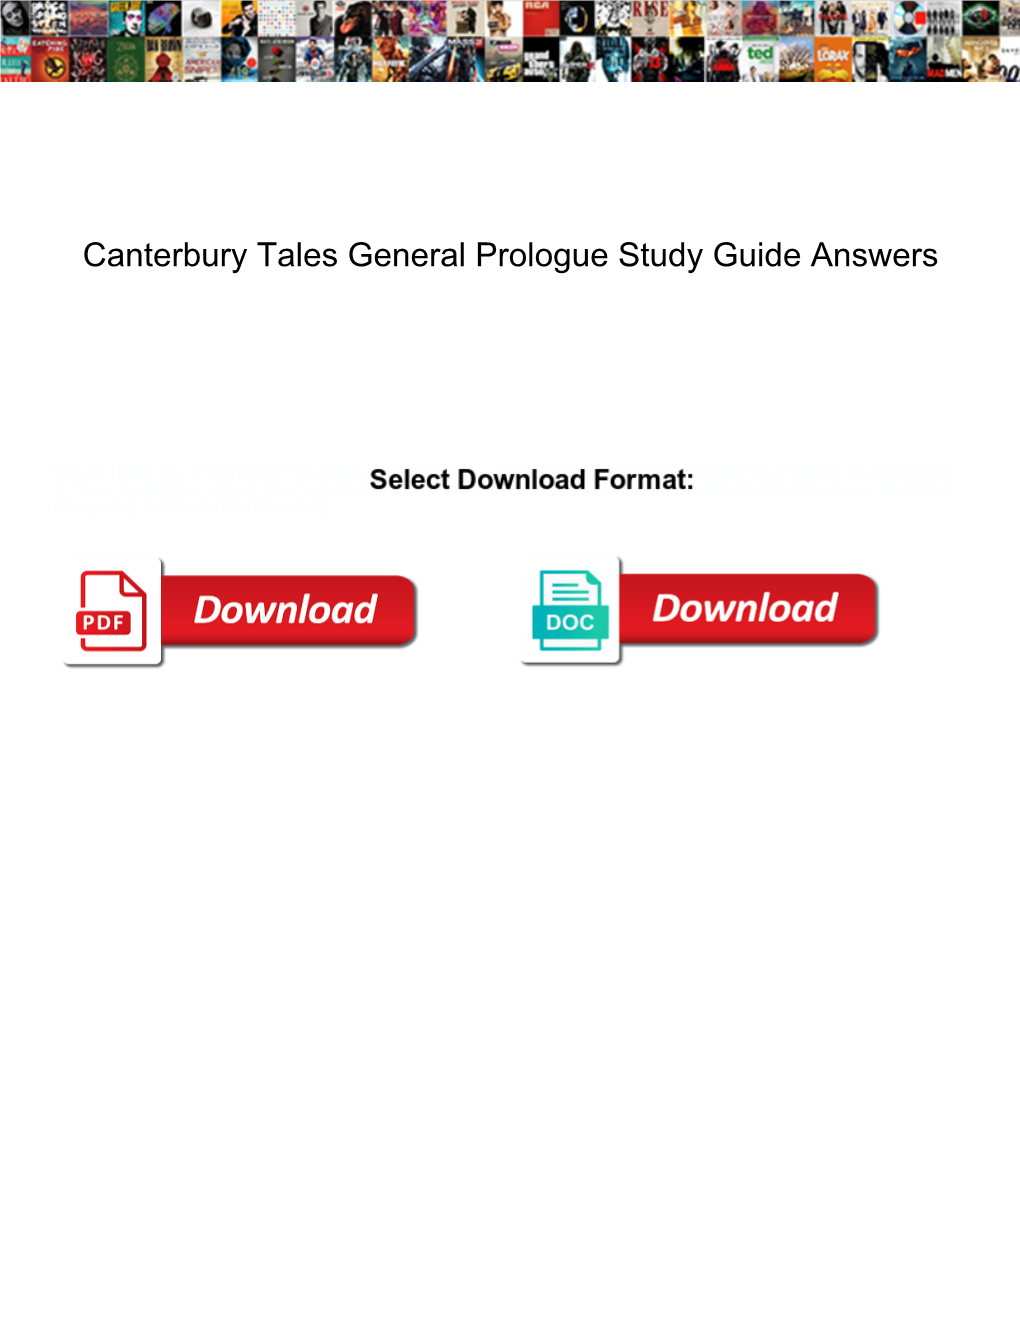 Canterbury Tales General Prologue Study Guide Answers